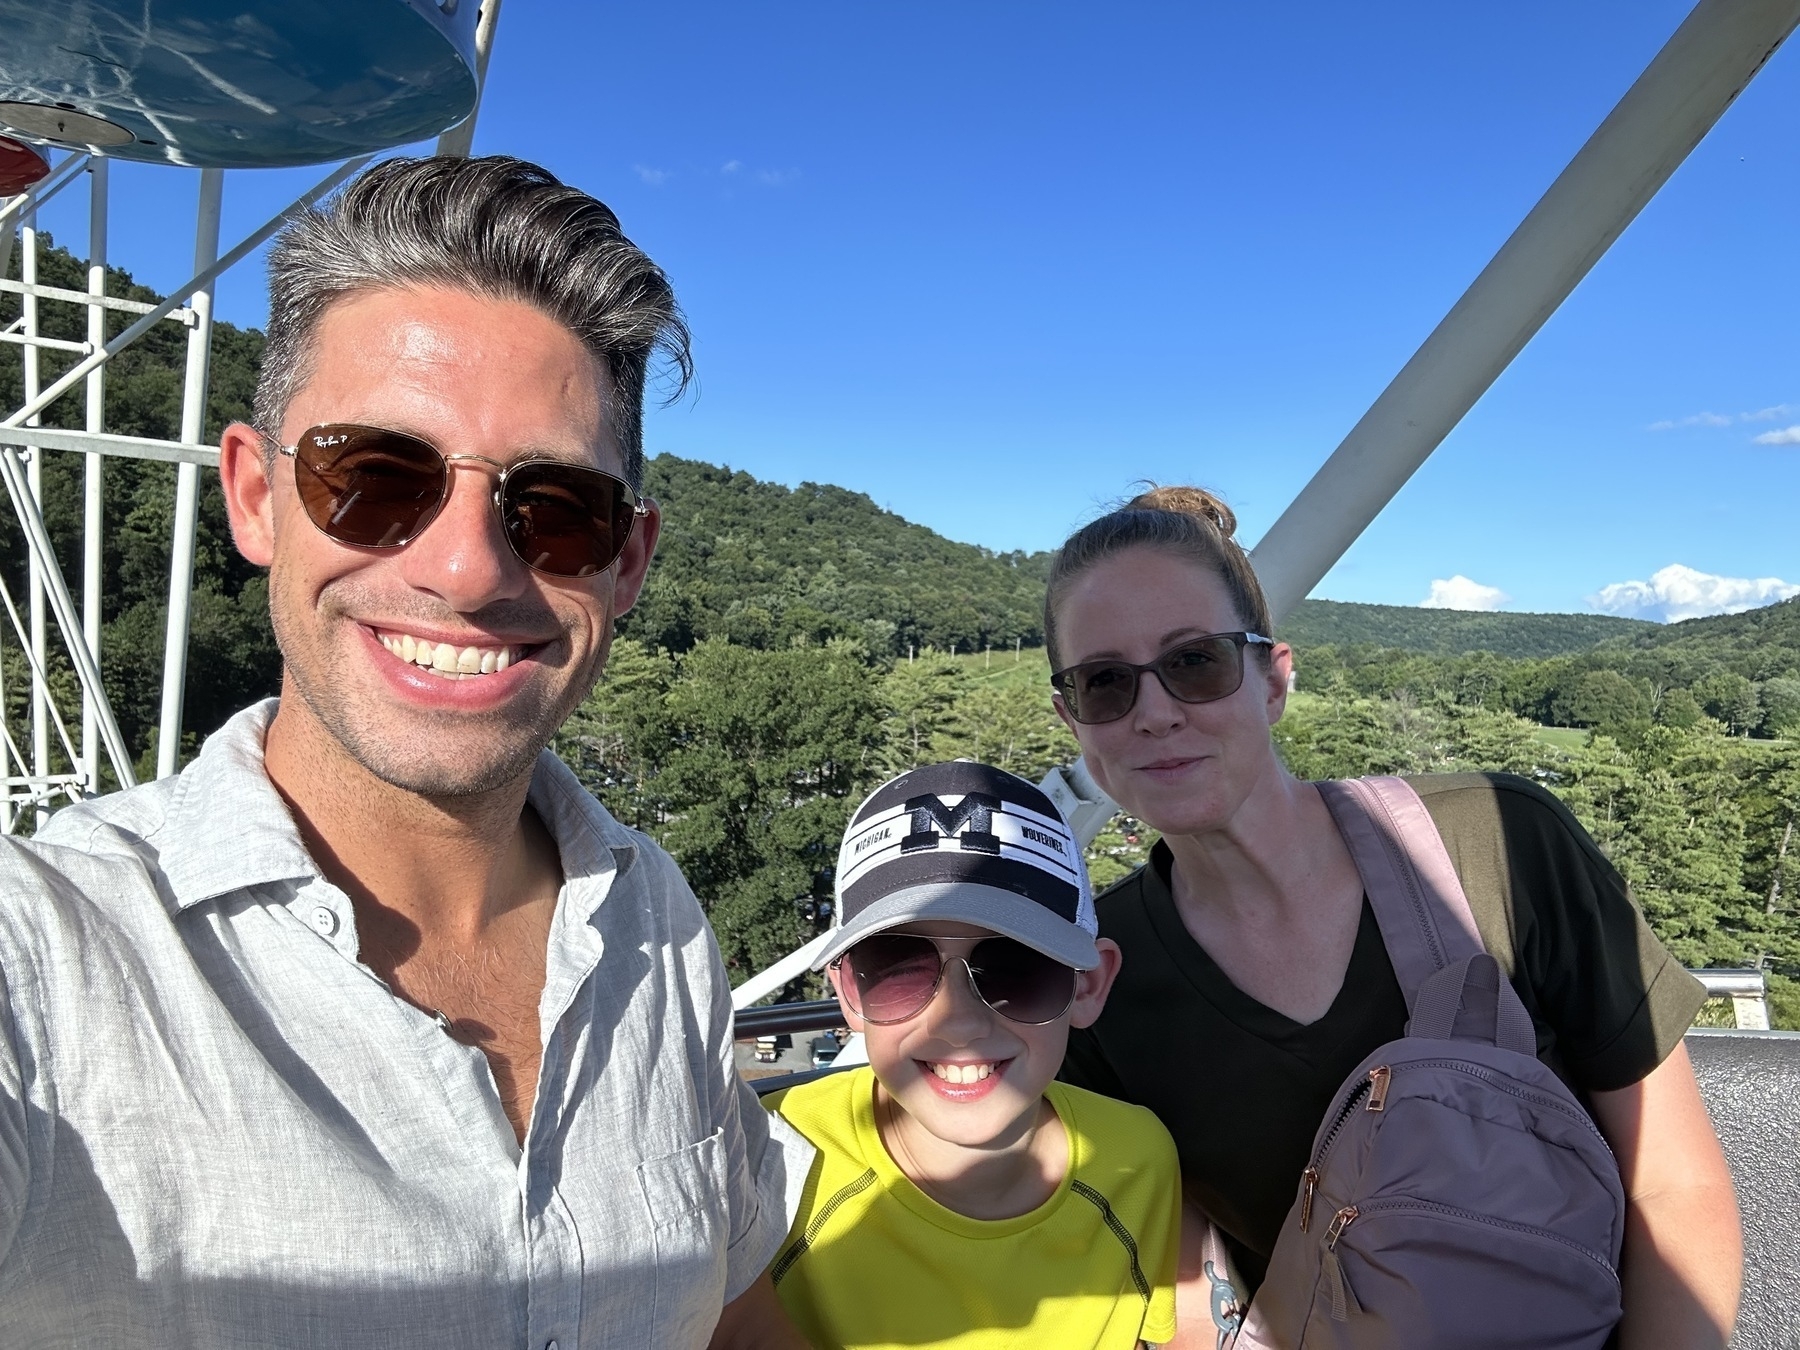 Aaron, Mozzie, and Lindsay on the Ferris Wheel at Knoebels